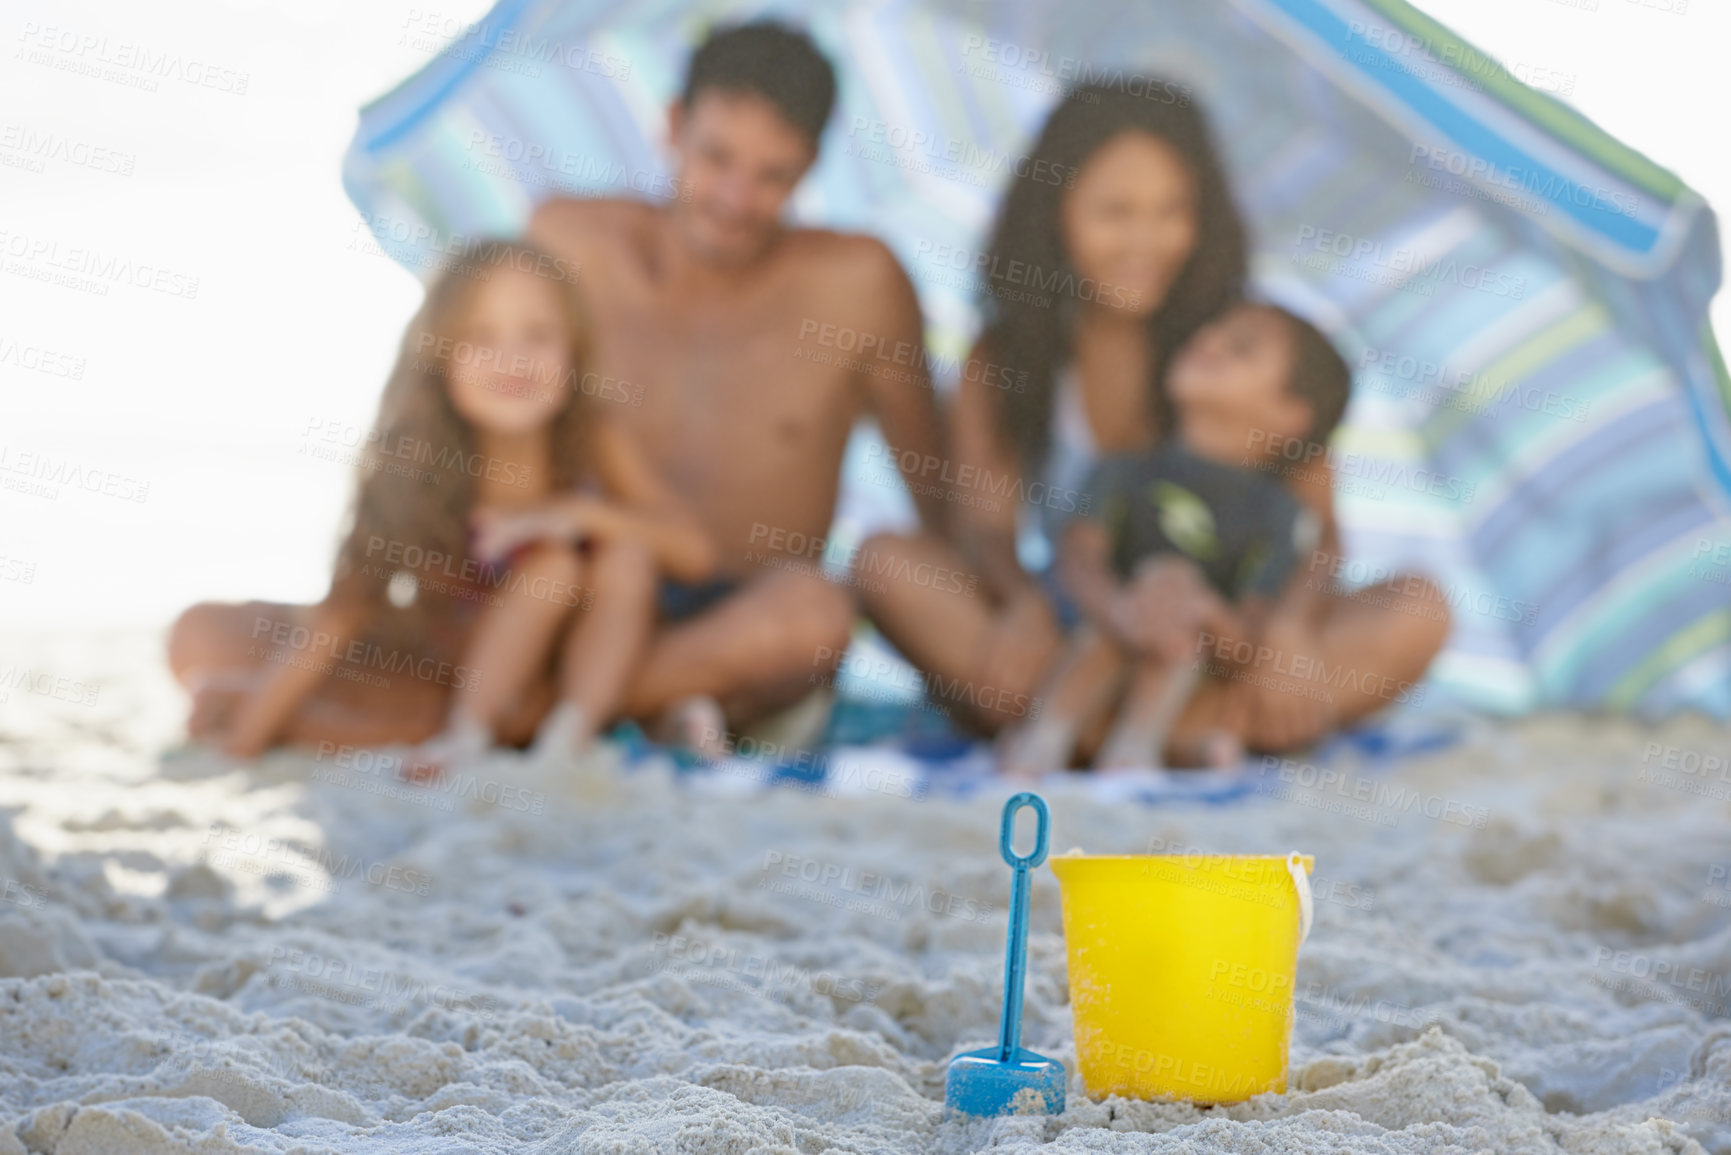 Buy stock photo Big family, sand and box on beach with umbrella, spade or bucket for playing on ocean coast. Blue and yellow toys on sandy shore with people for fun bonding, relax or outdoor holiday weekend together